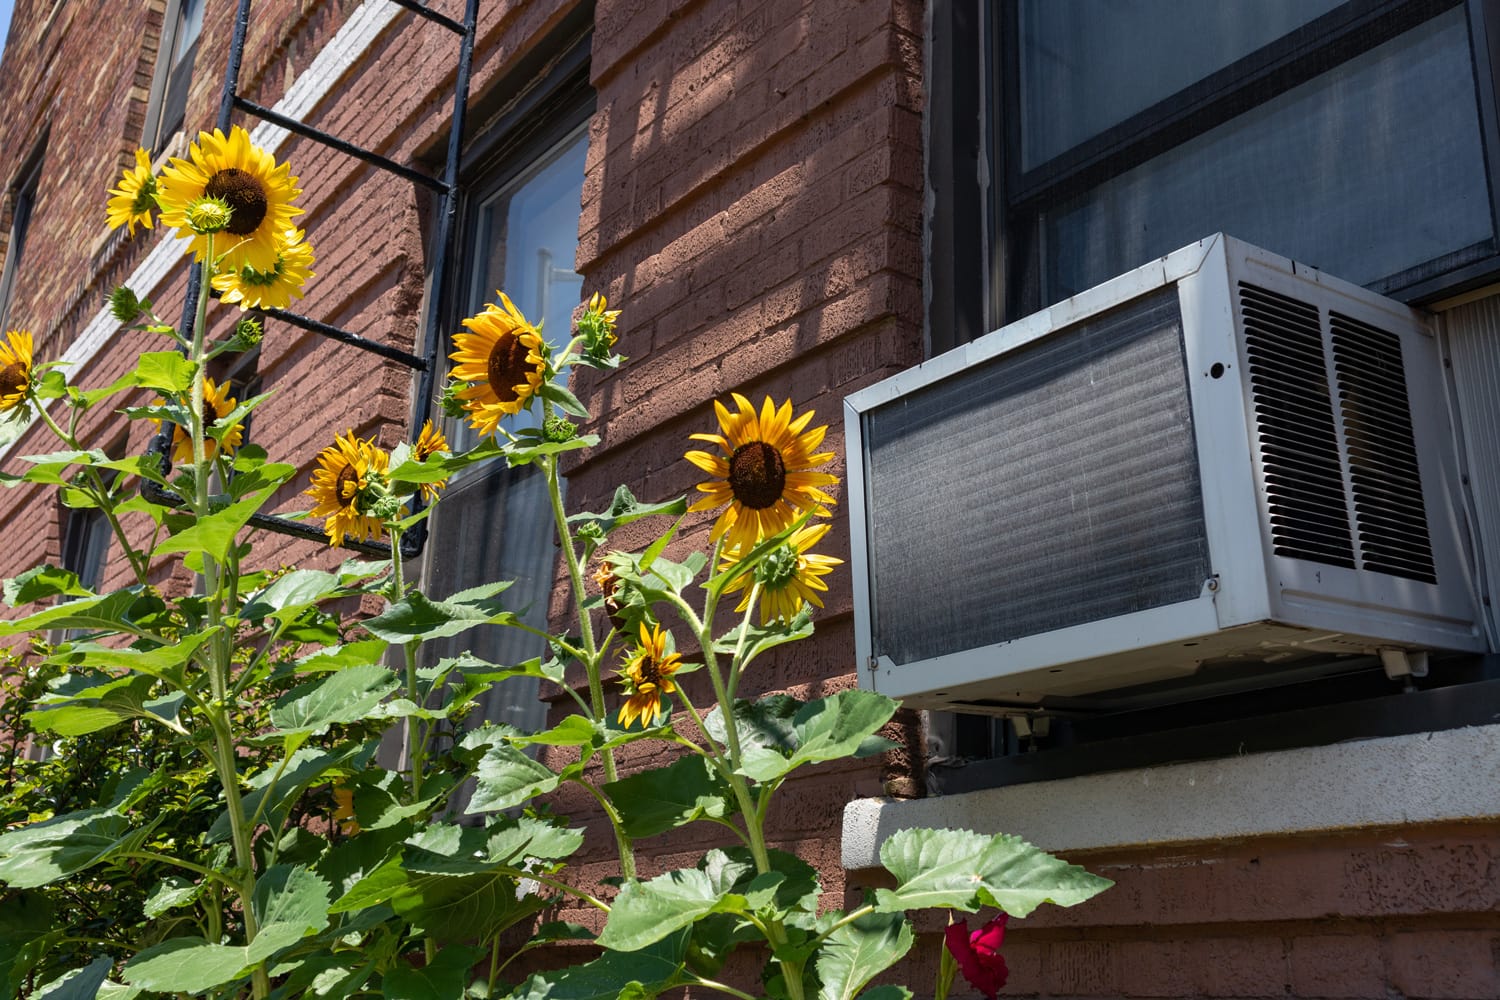 A window air conditioning unit outside an old brick apartment building above a garden with yellow sunflowers during summer